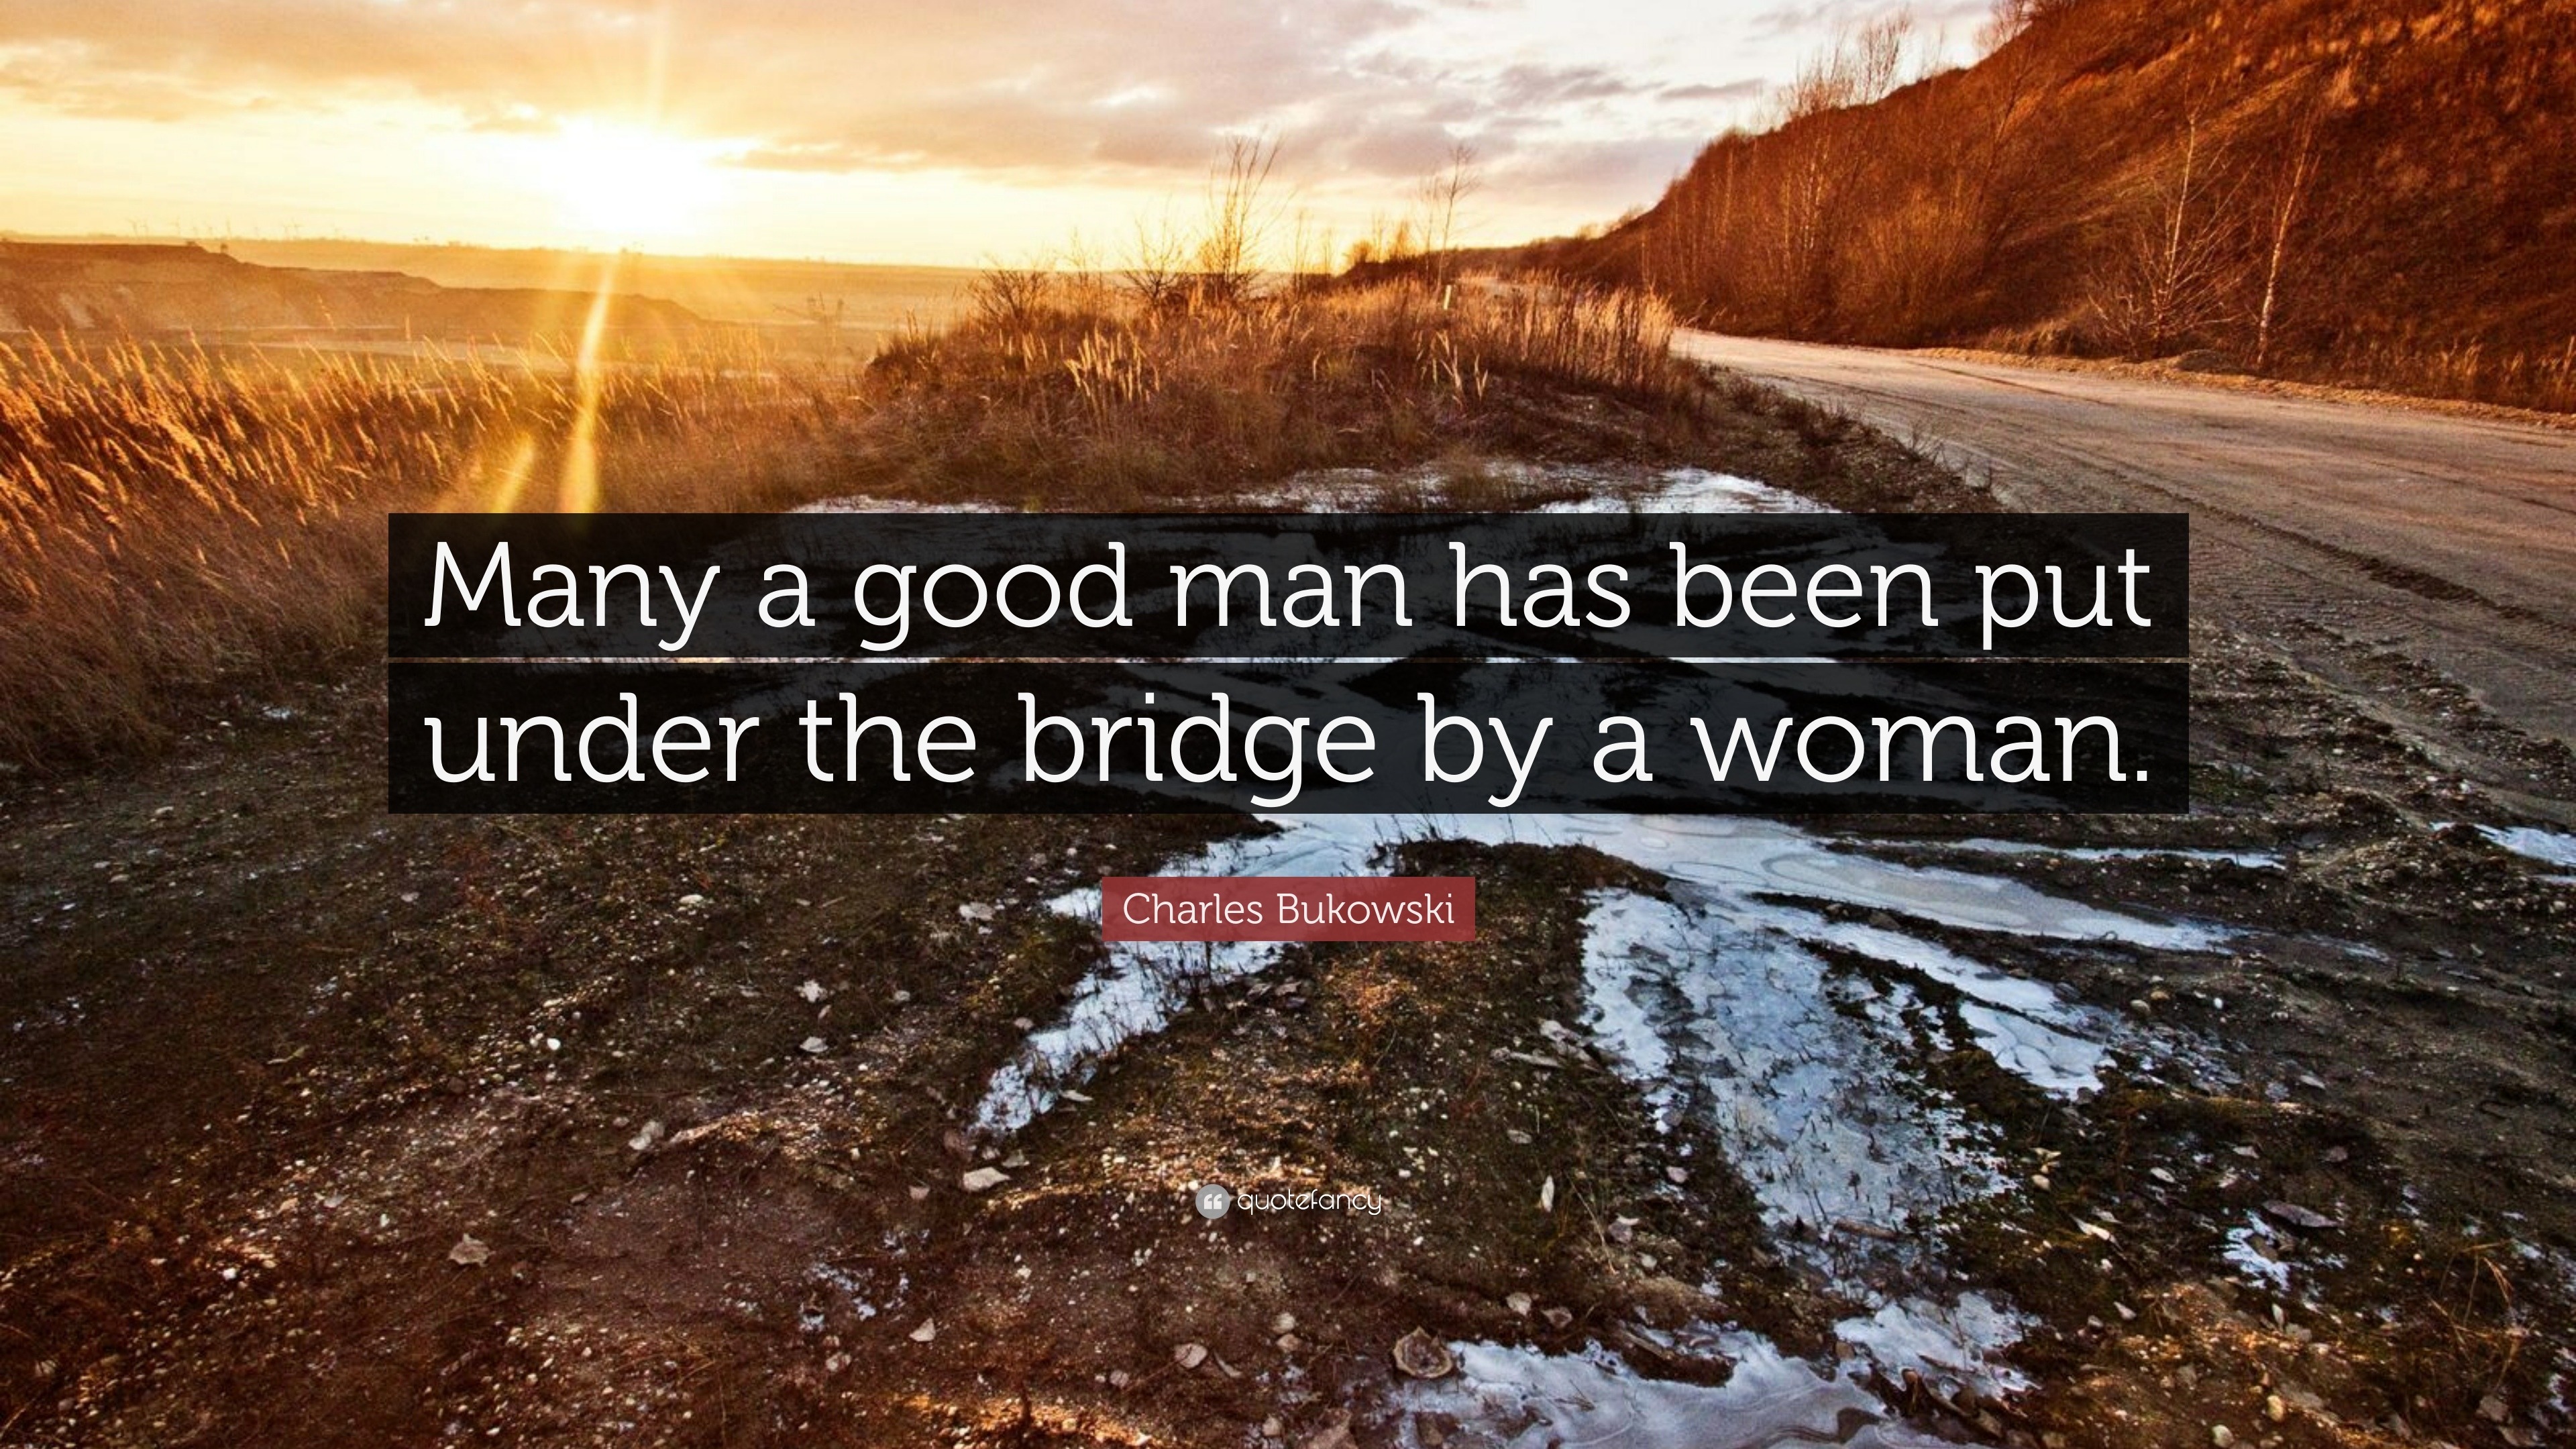 Charles Bukowski Quote “Many a good man has been put under the bridge by